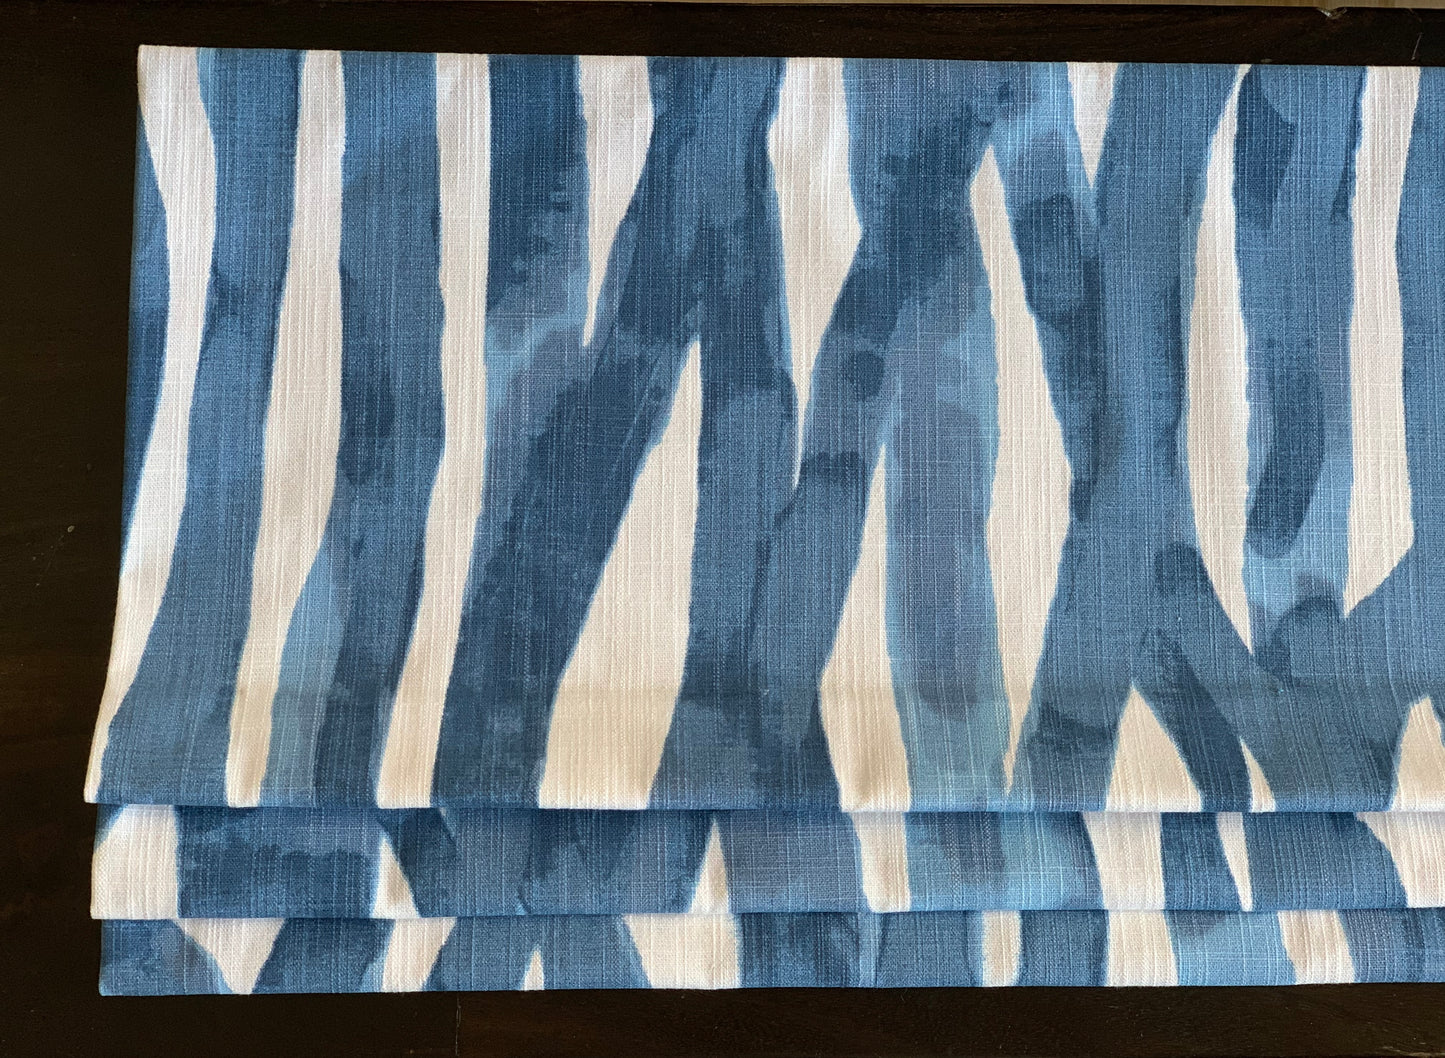 Faux Roman Shade Valance in Brush Strokes of Blue and White on 100% Cotton Slub Canvas, Fully Lined Window Treatments